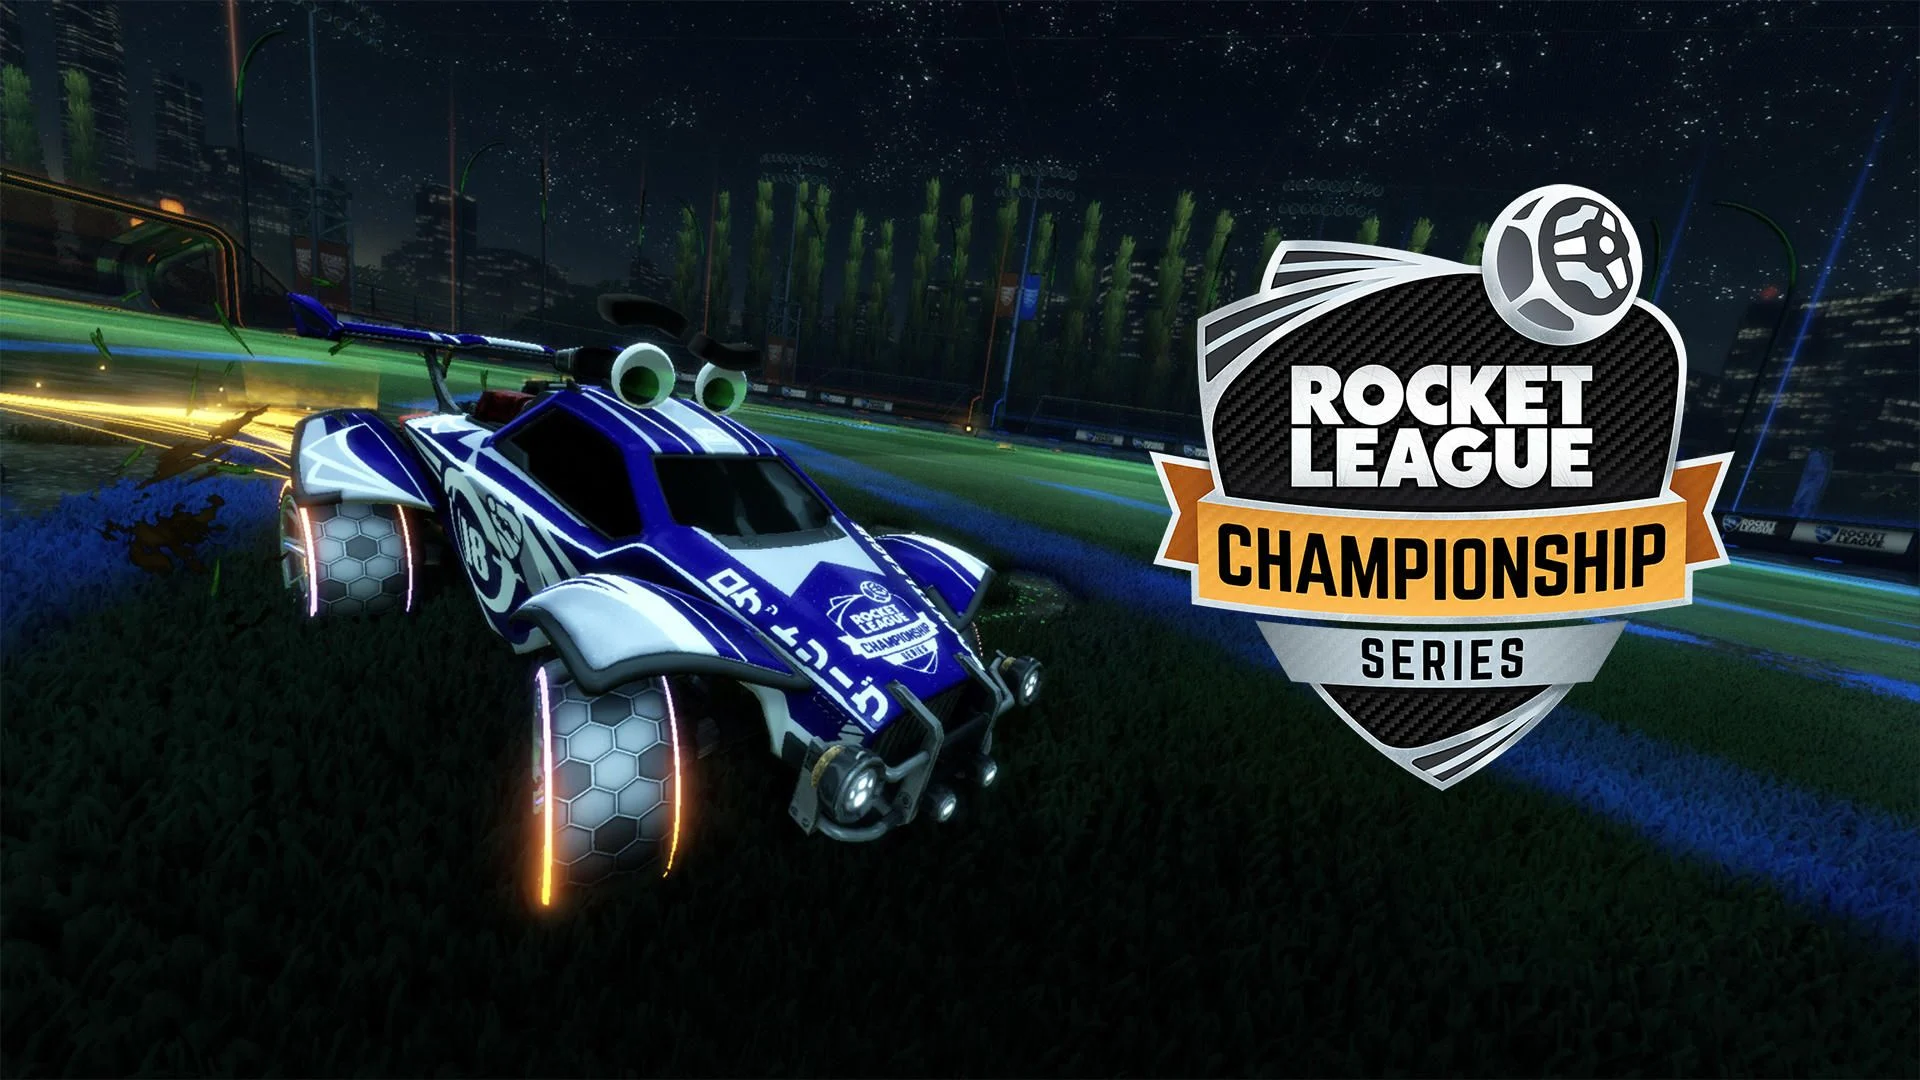 Rocket League Championship Series - 2Piece Stands Out From The Crowd